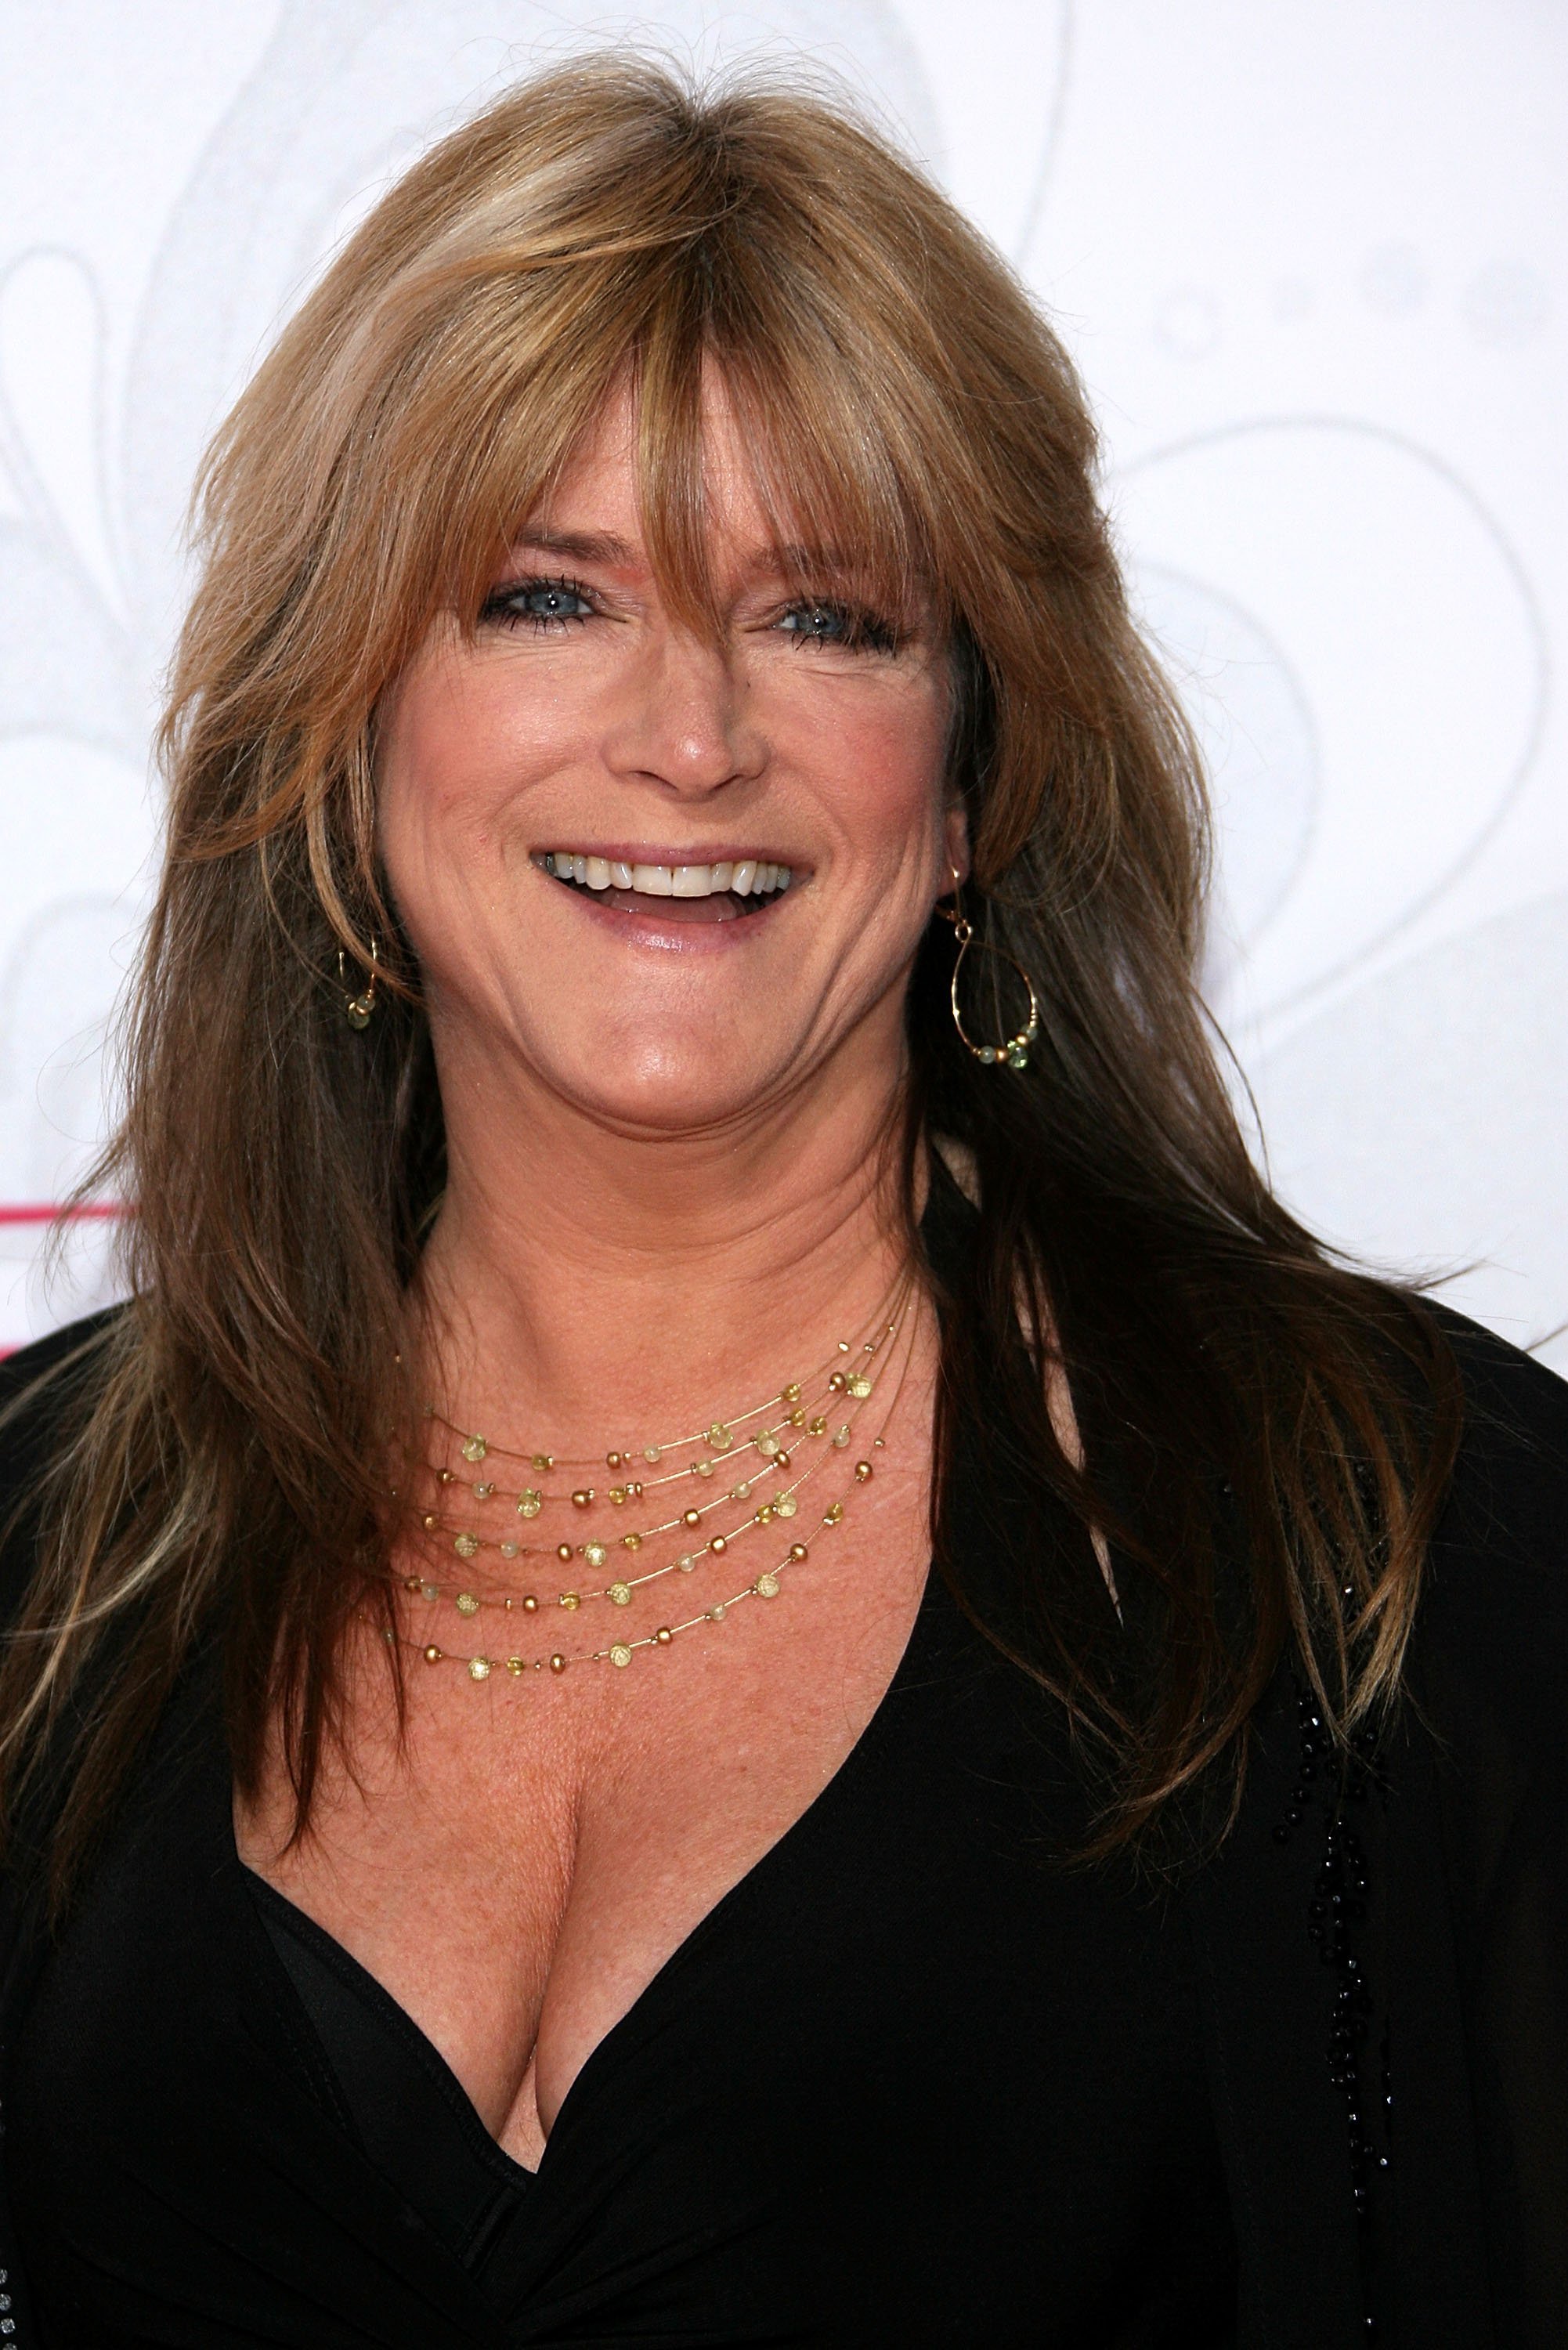 Susan Olsen at the 5th Annual TV Land Awards  on April 14, 2007 in Santa Monica, California. | Source: Getty Images)